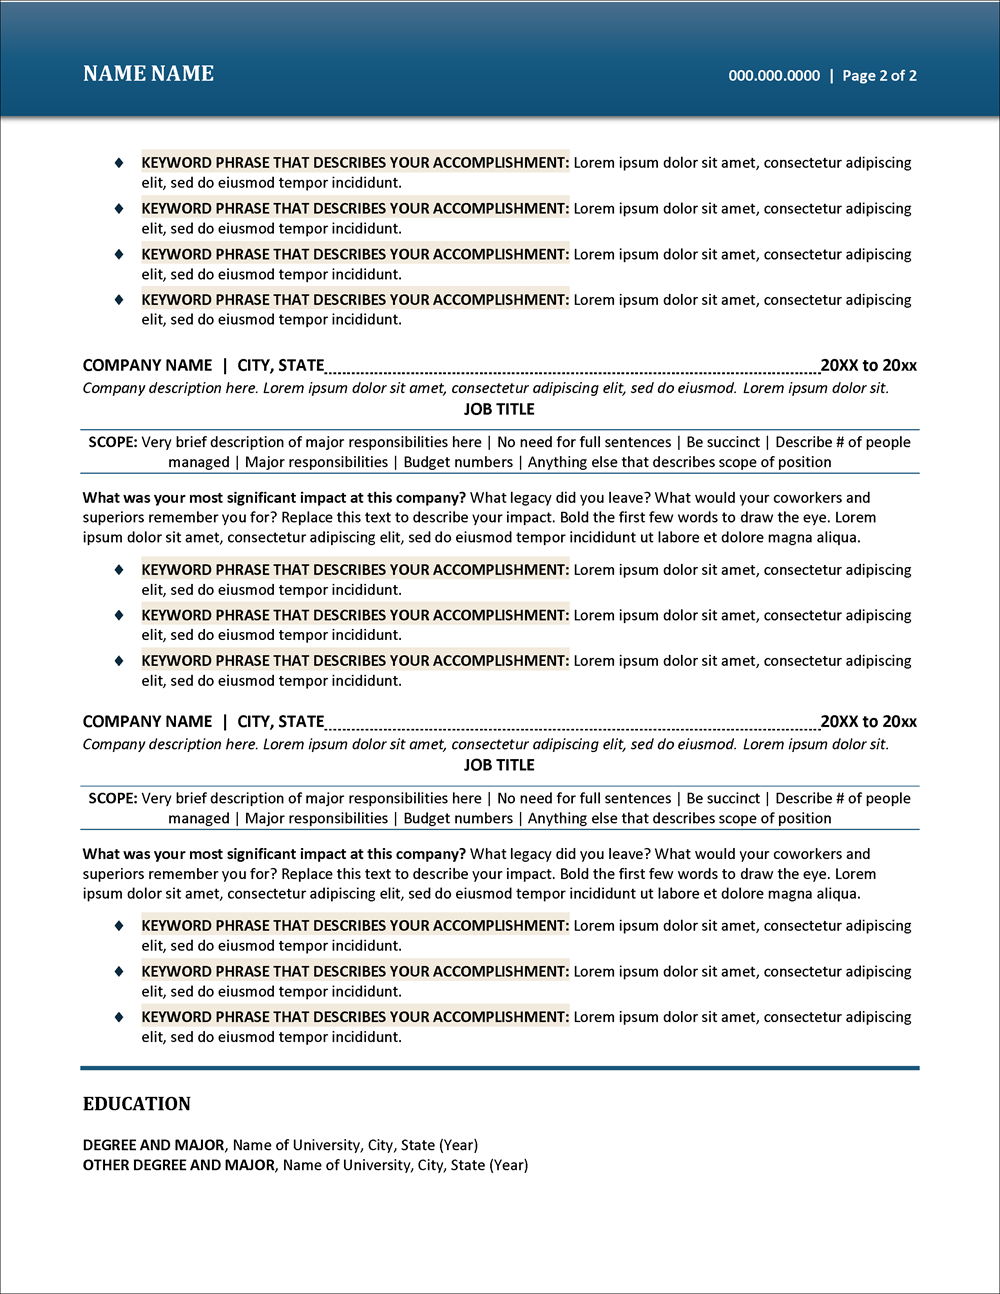 Executive Resume Template Page 2